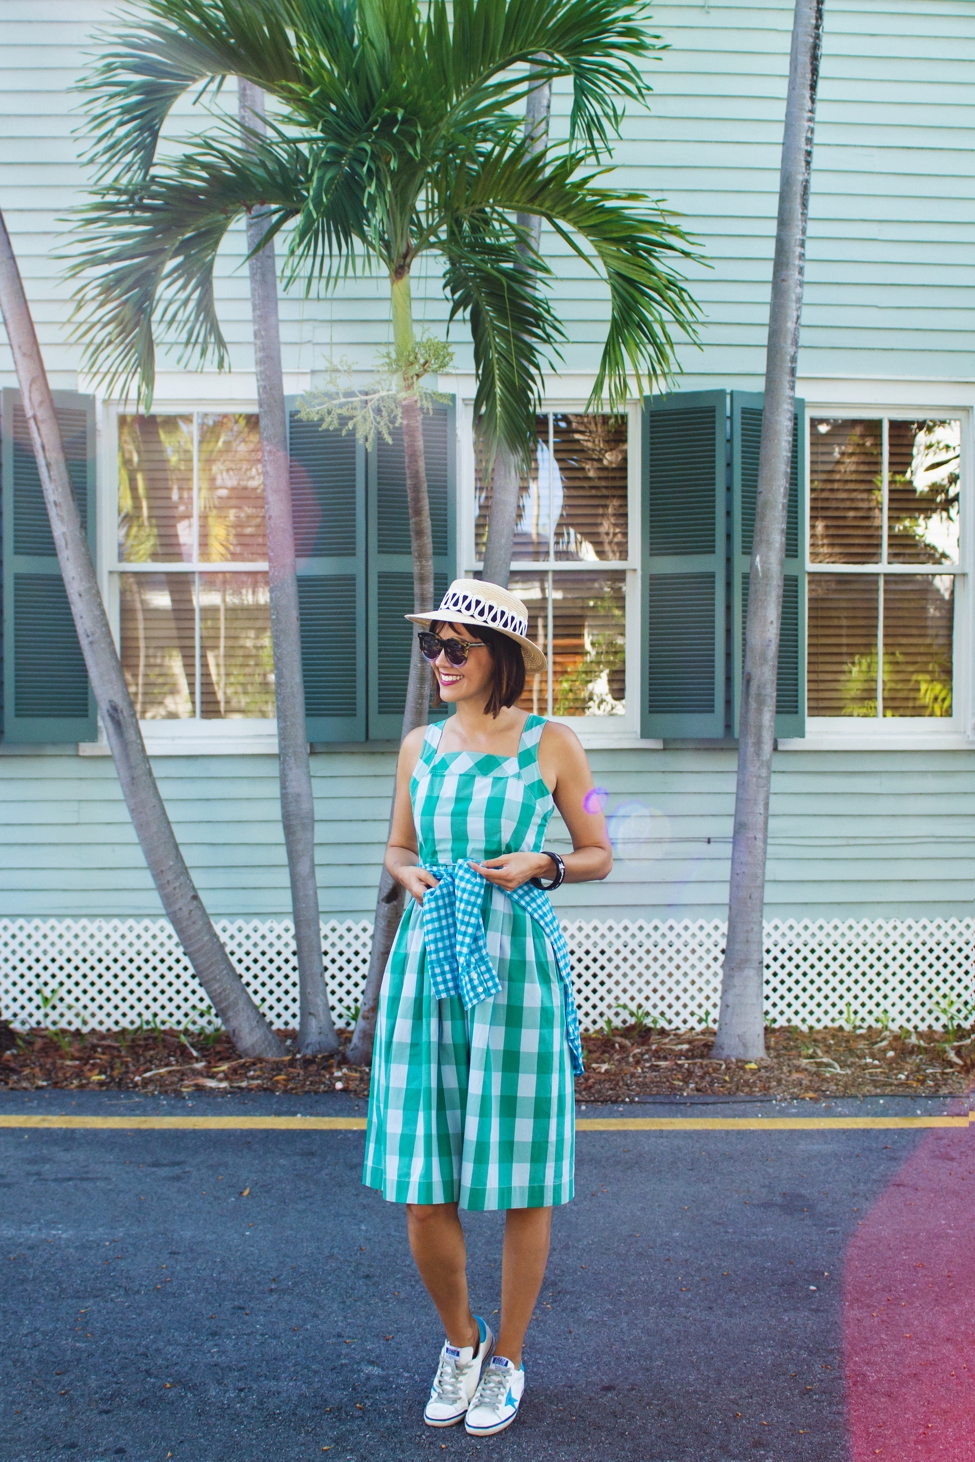 Wear Where Well Gingham on Gingham_0005